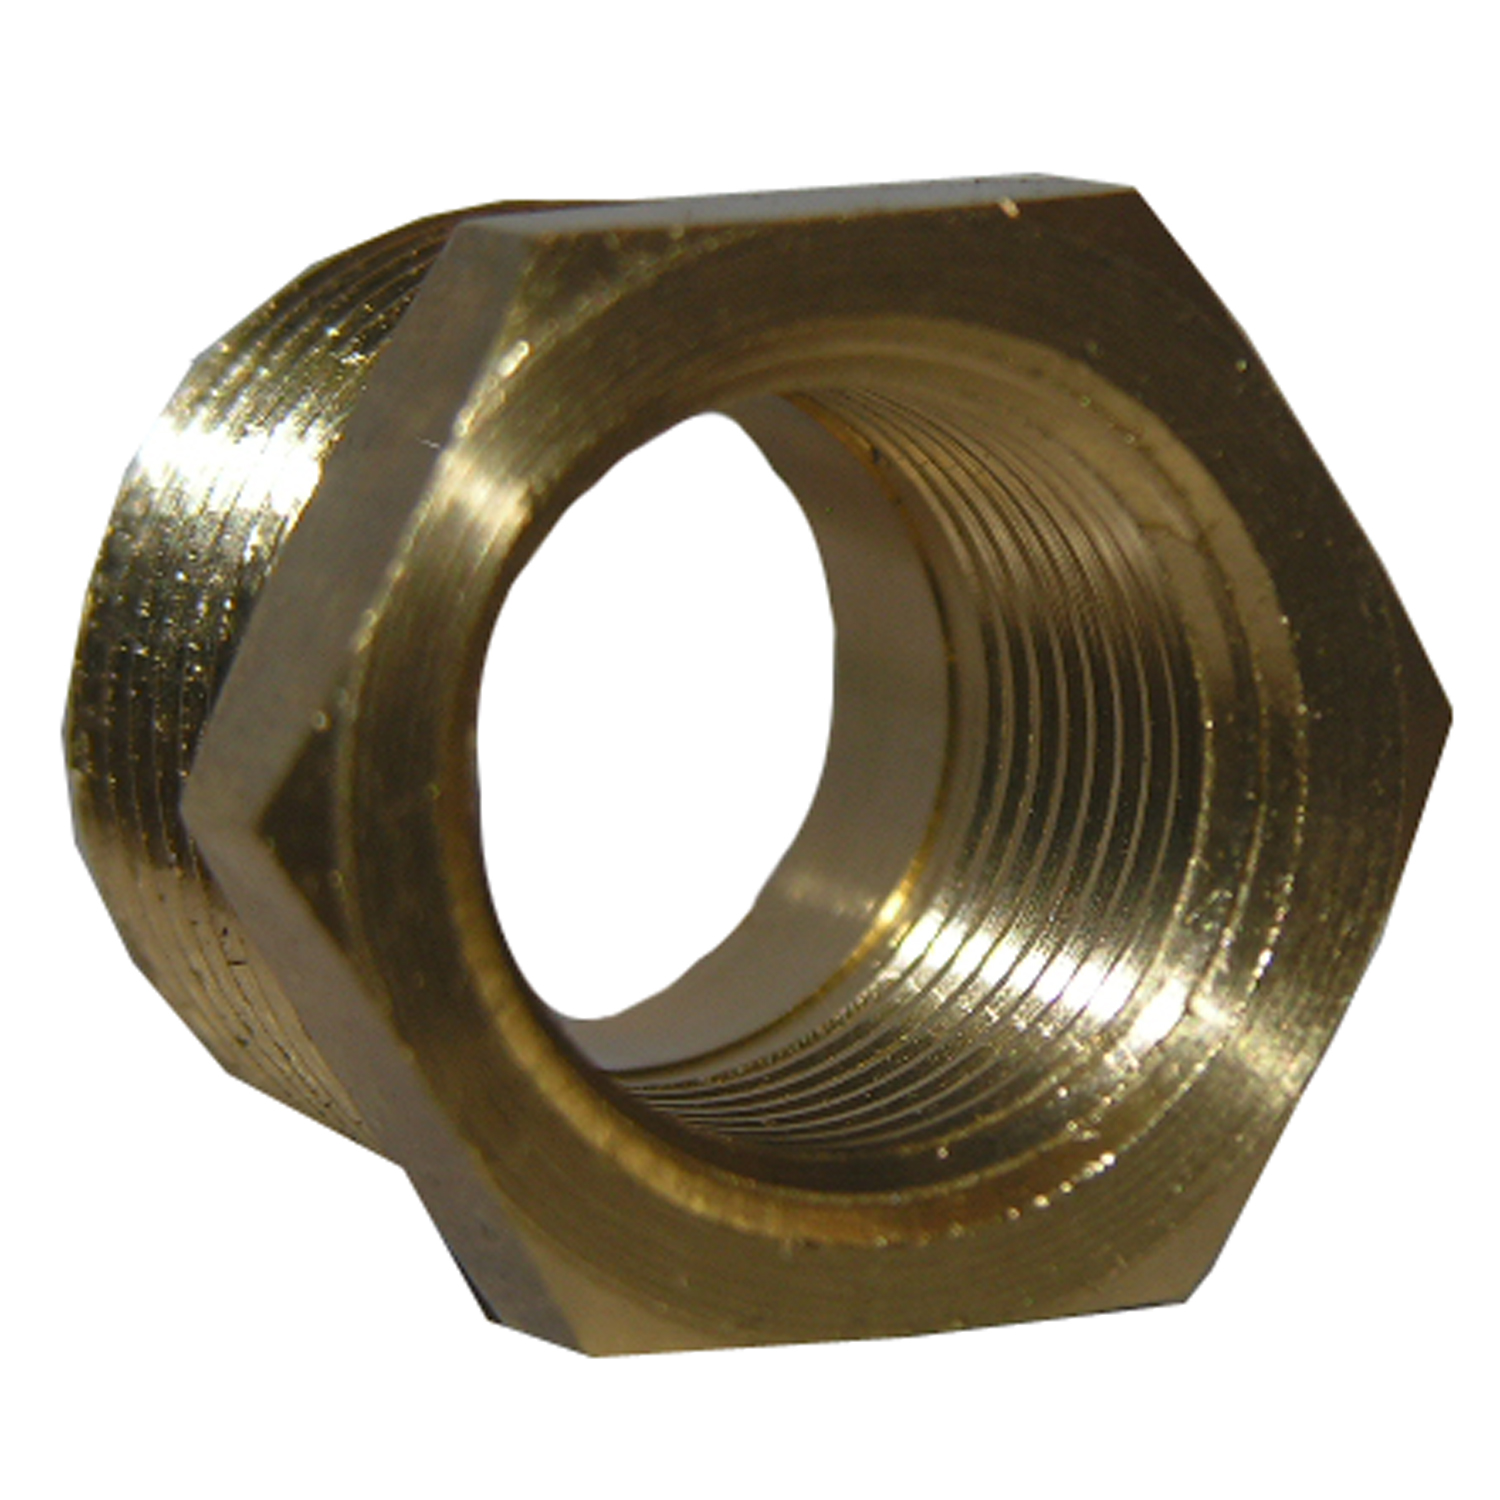 17-9251 Hex Pipe Bushing, 1/2 x 3/8 in, MPT x FPT, Brass, 125 psi Pressure